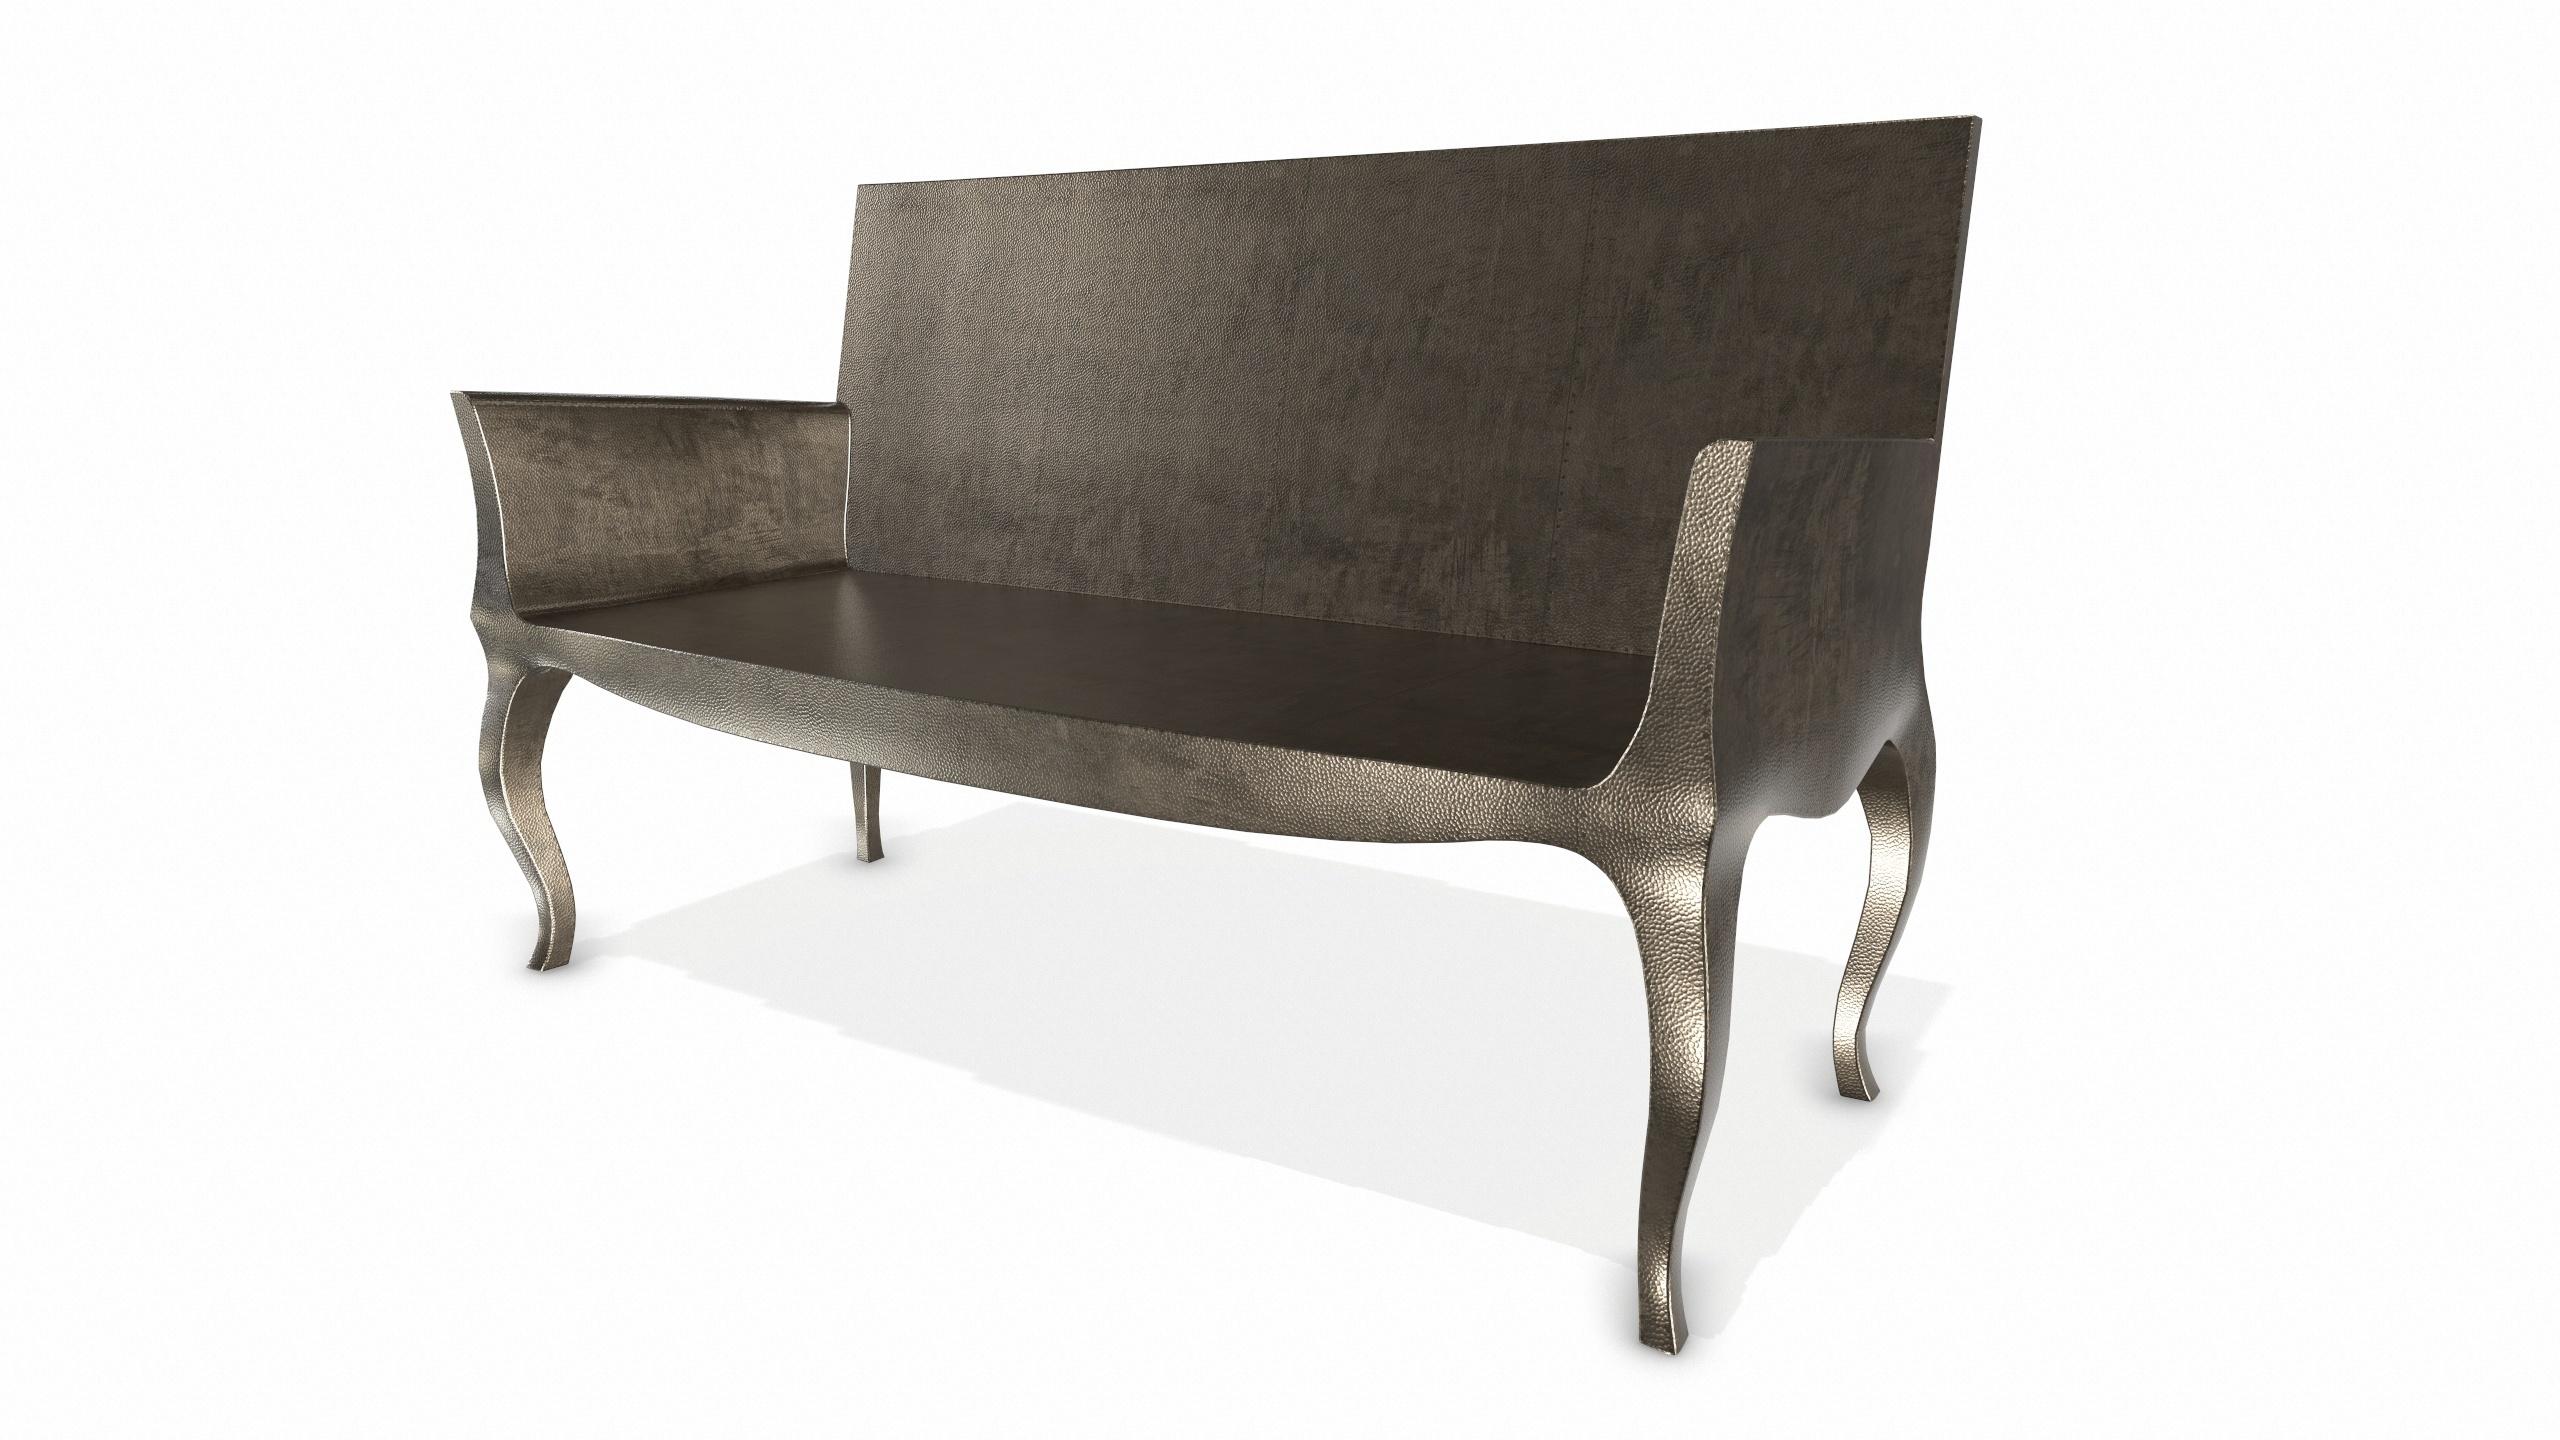 American Louise Settee Art Deco Settees in Mid. Hammered Antique Bronze by Paul Mathieu For Sale